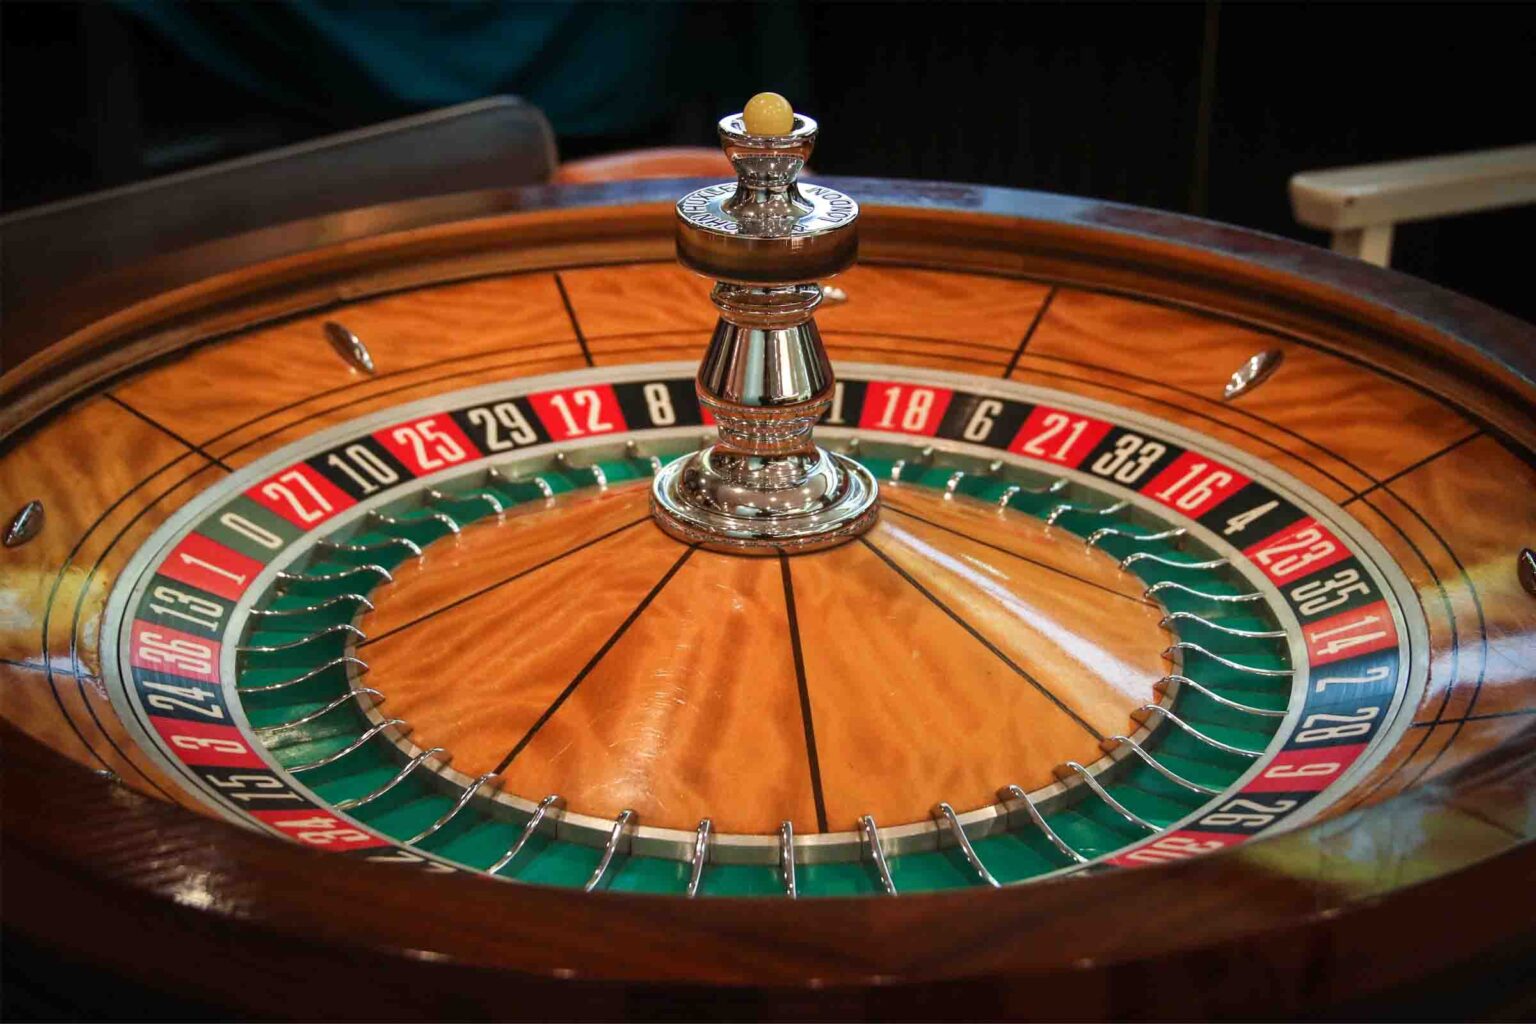 These are the very best online casino games to play when you're looking for good gambling odds.